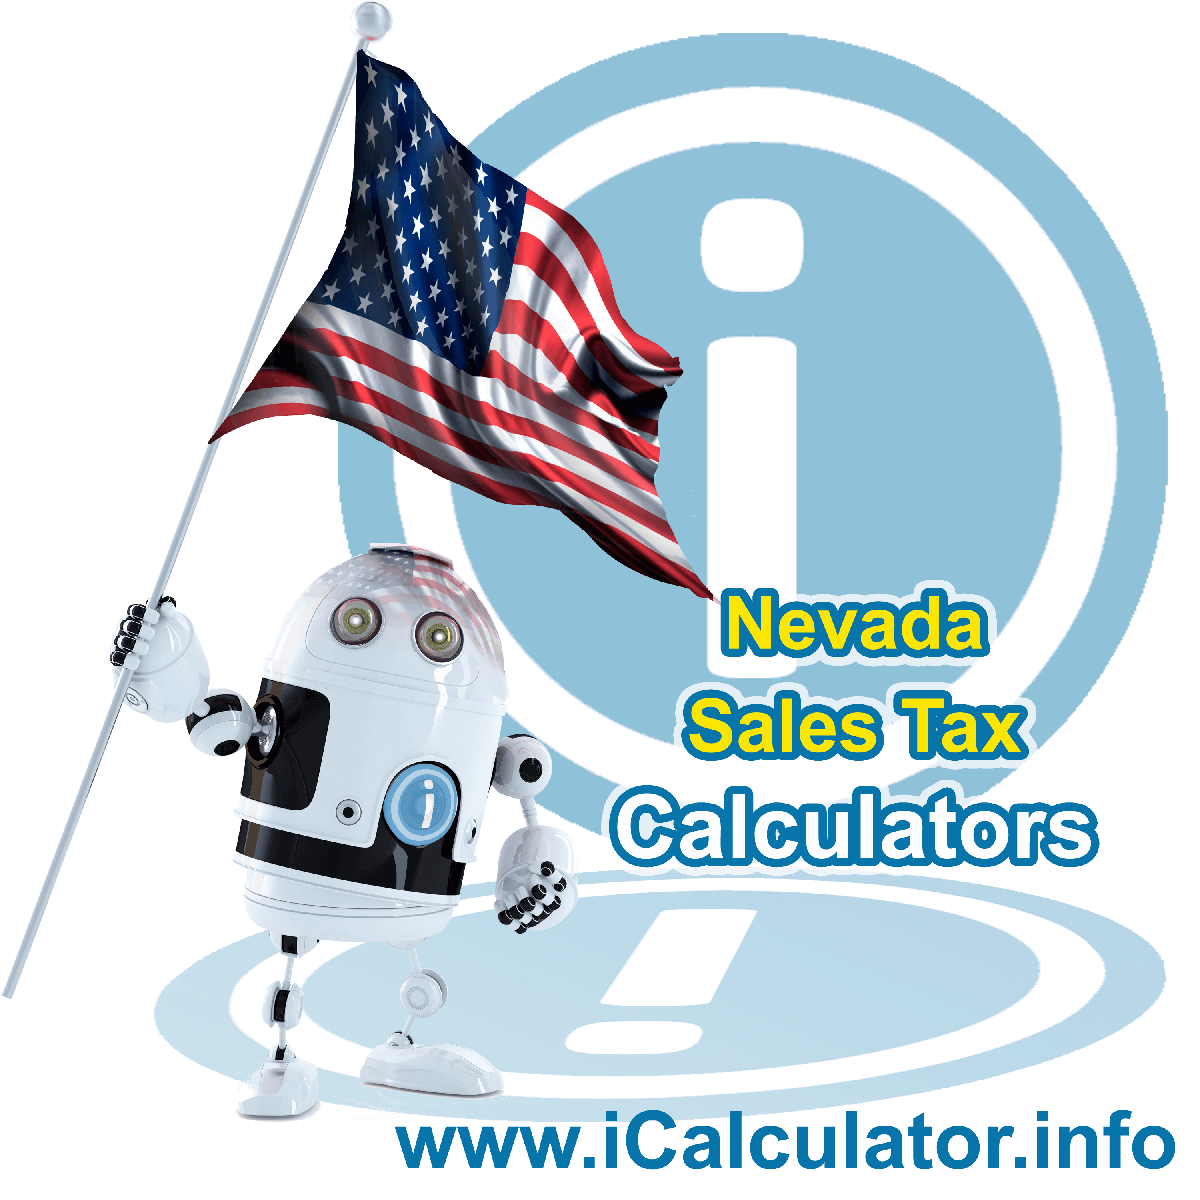 Carson City County Sales Rates: This image illustrates a calculator robot calculating Carson City County sales tax manually using the Carson City County Sales Tax Formula. You can use this information to calculate Carson City County Sales Tax manually or use the Carson City County Sales Tax Calculator to calculate sales tax online.